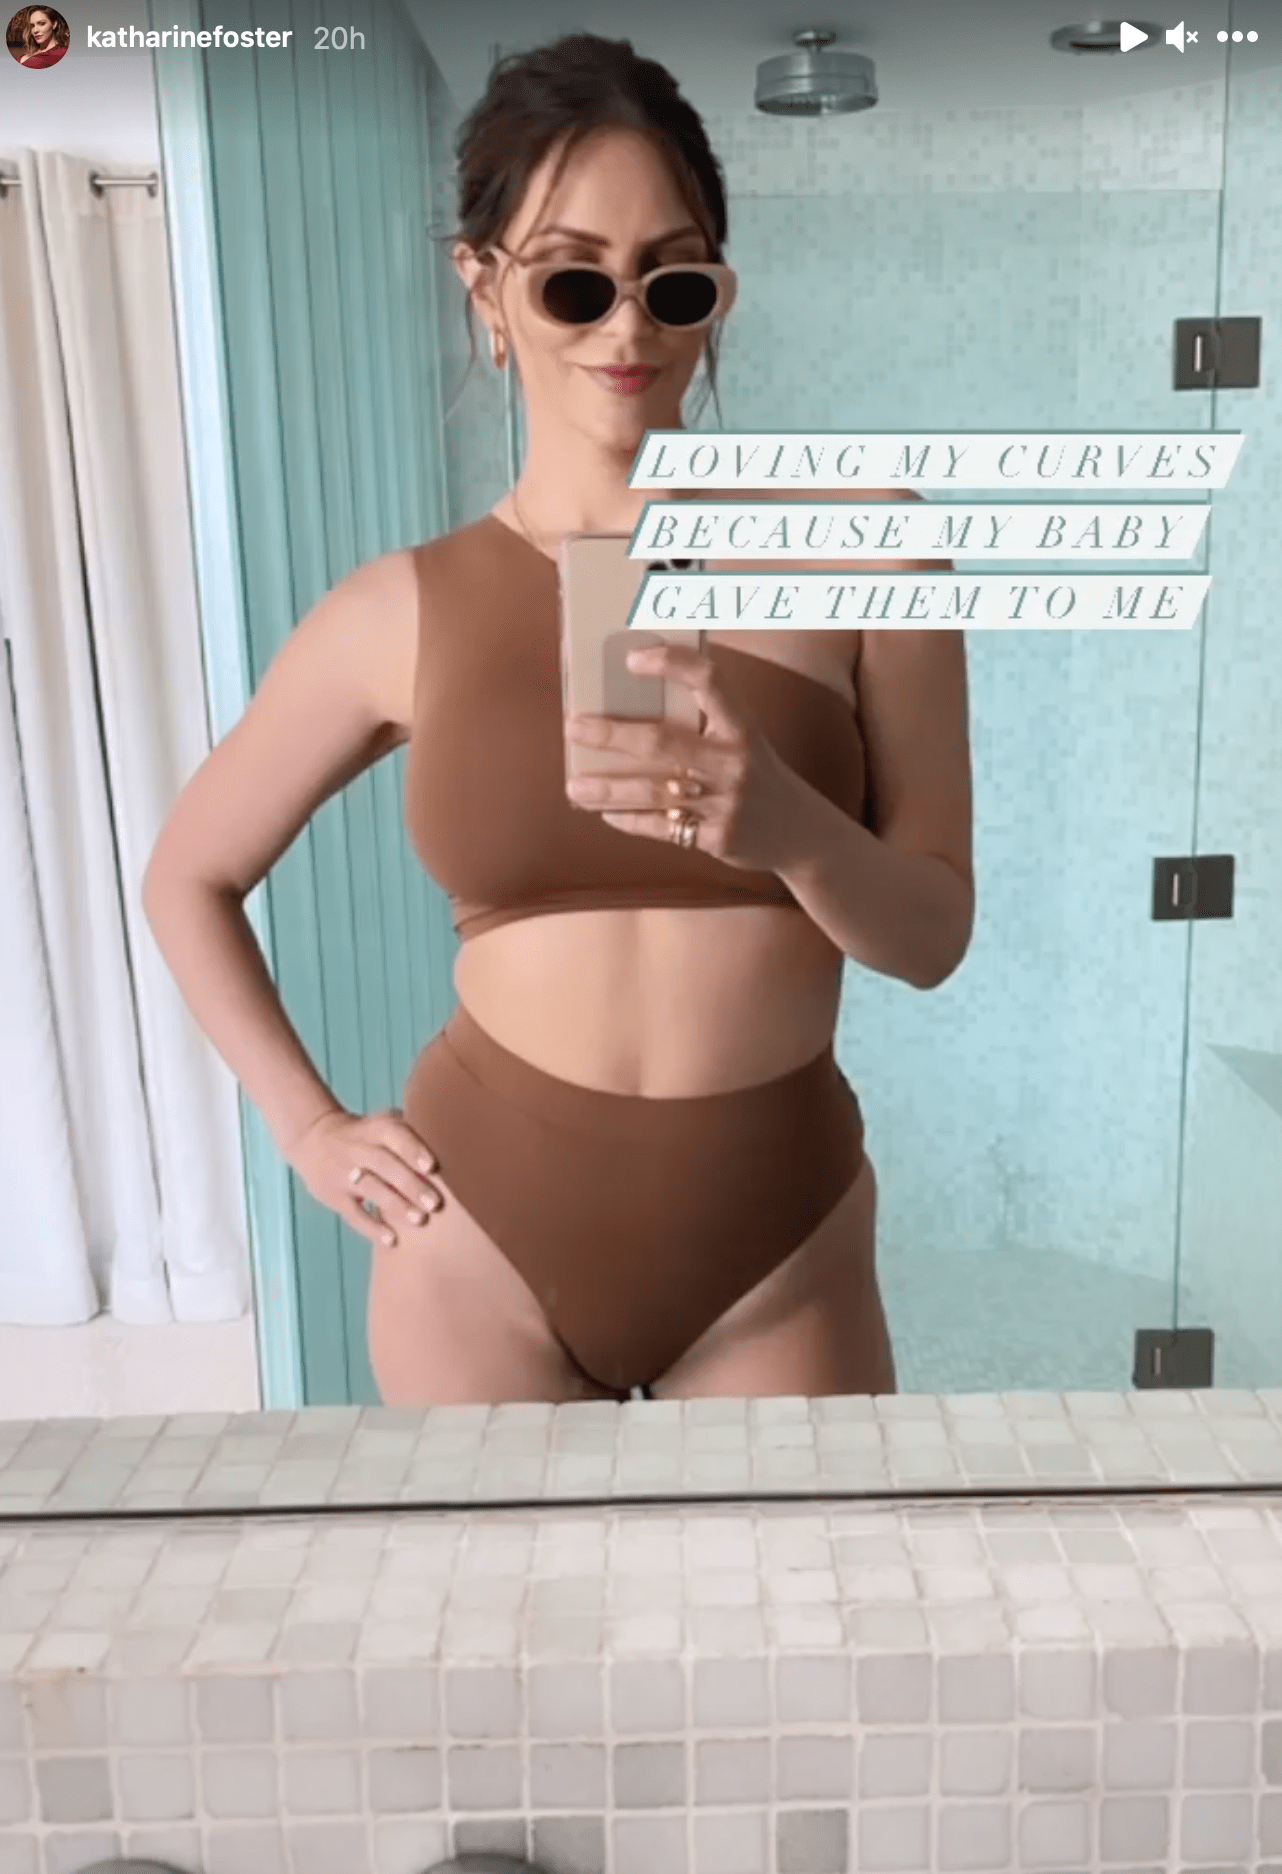 New Mom Katharine McPhee Foster's Steamy Undies Pics Are Total 🔥